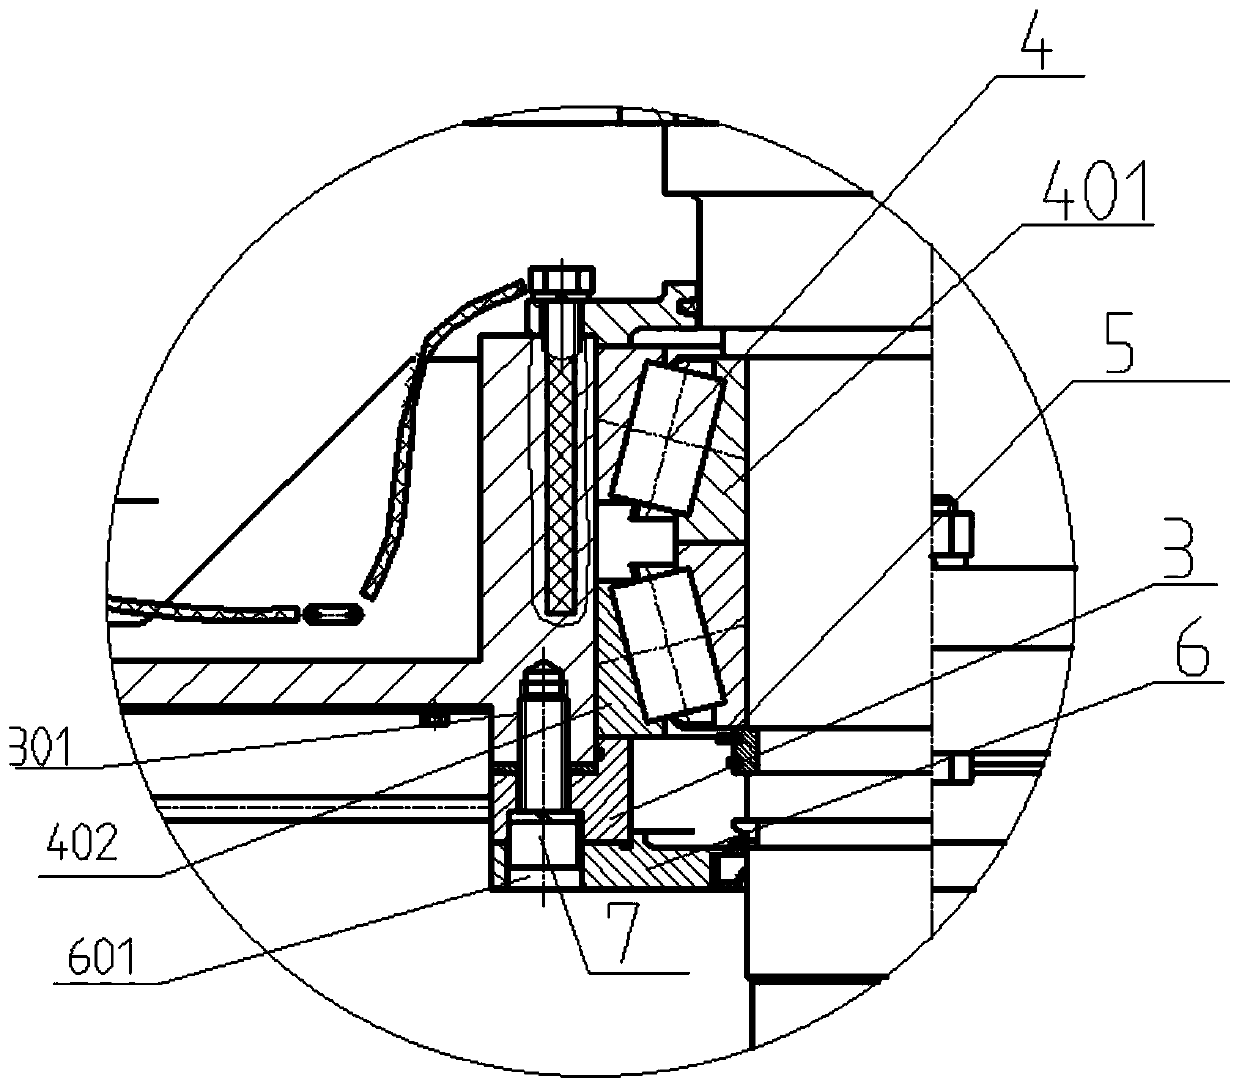 Double-front end cover structure for vertical installation motor